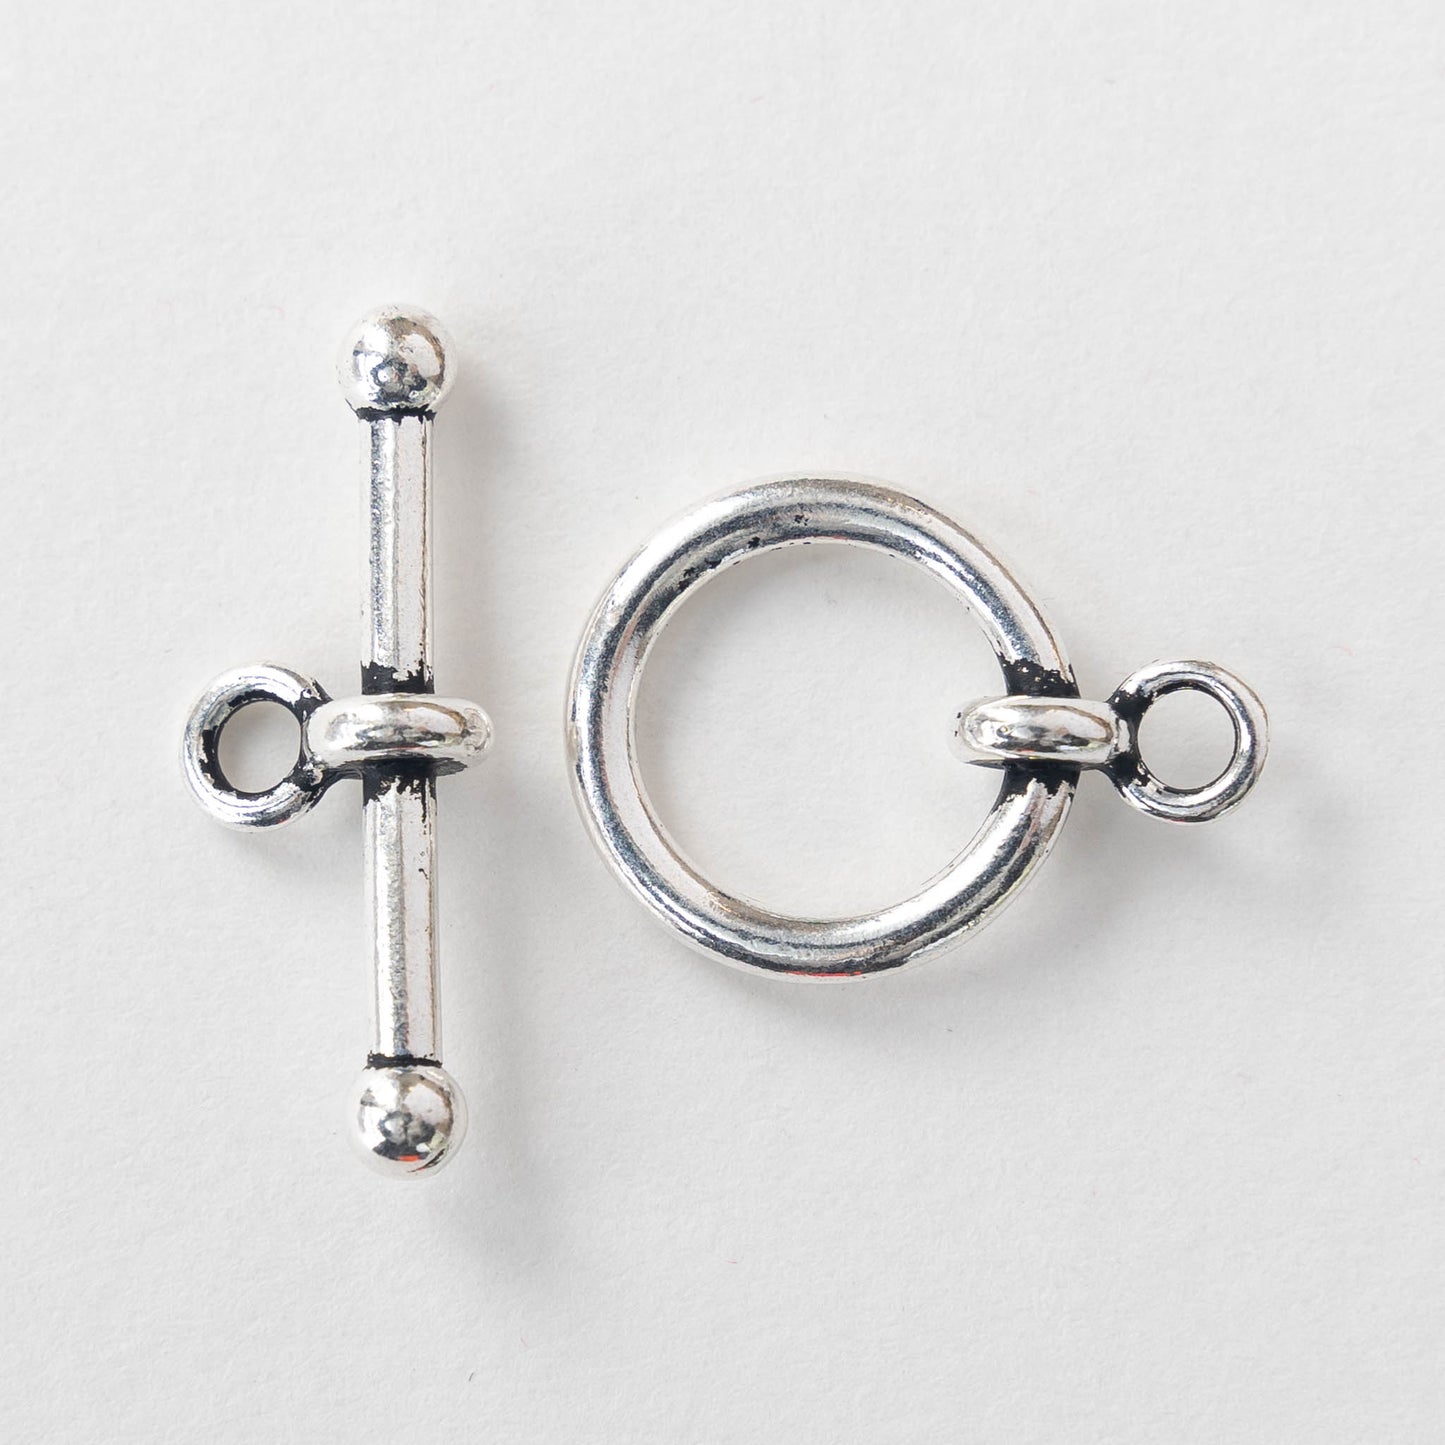 Load image into Gallery viewer, Large 18.5mm Toggle Clasp - Antiqued Silver Finish - 1 Clasp
